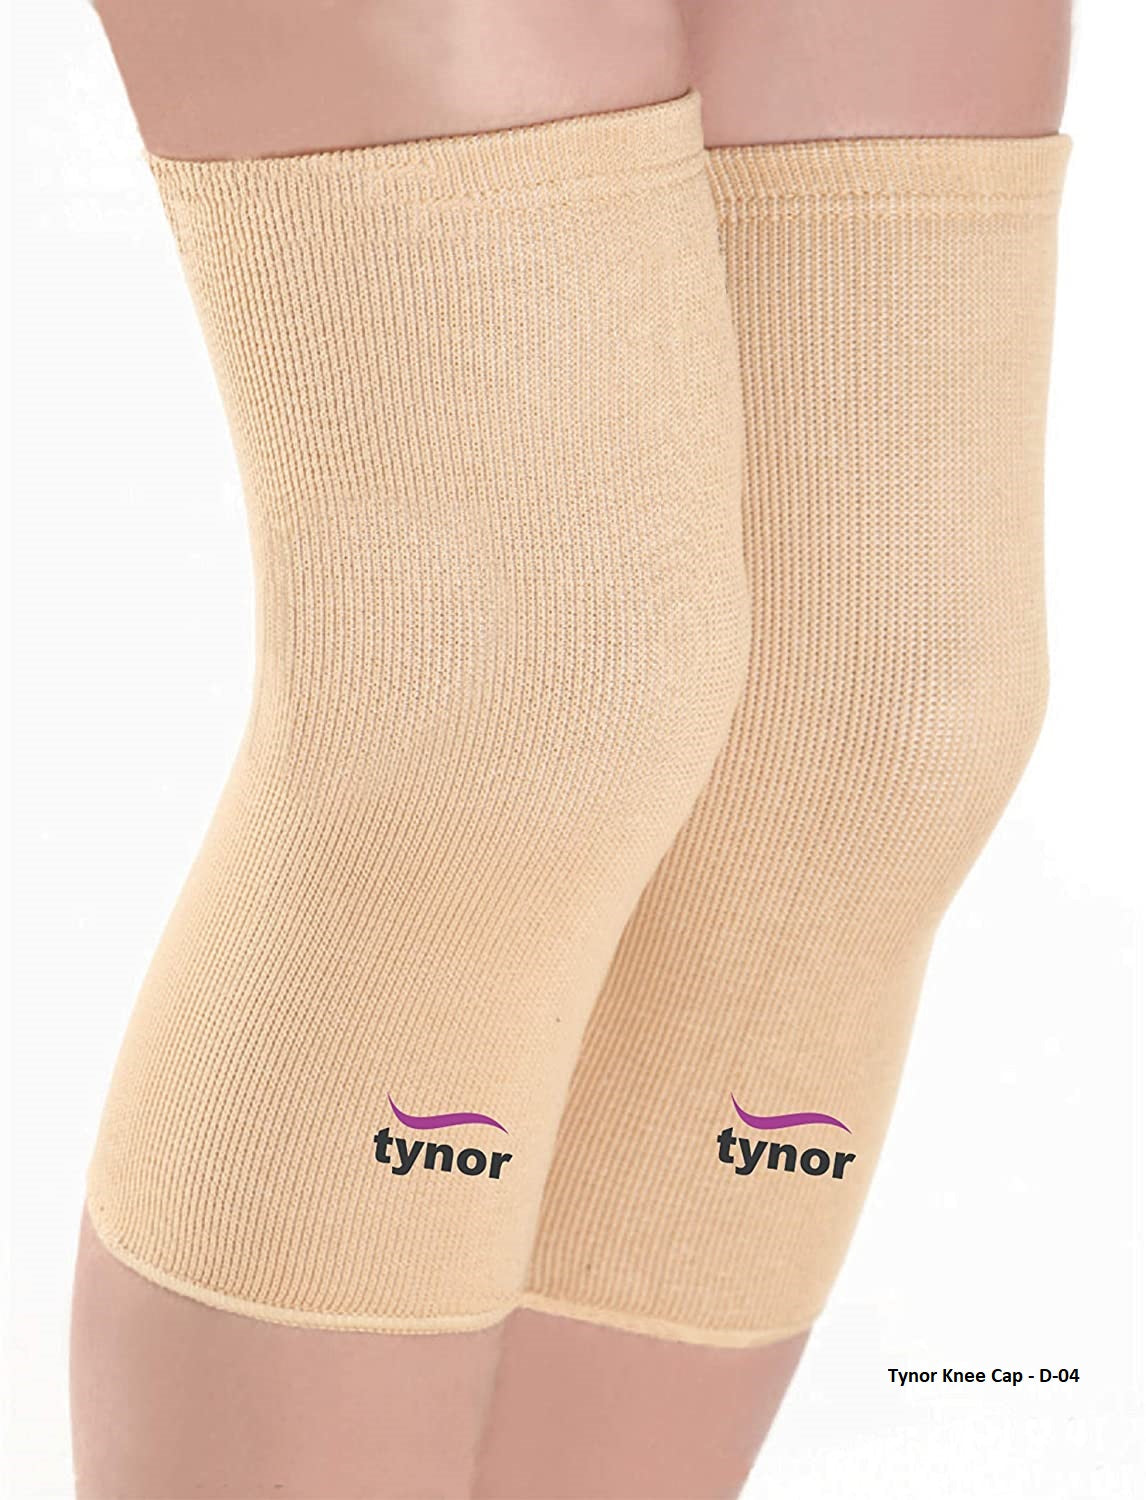 Get the Best Knee & Calf Support from Top Vendors in India